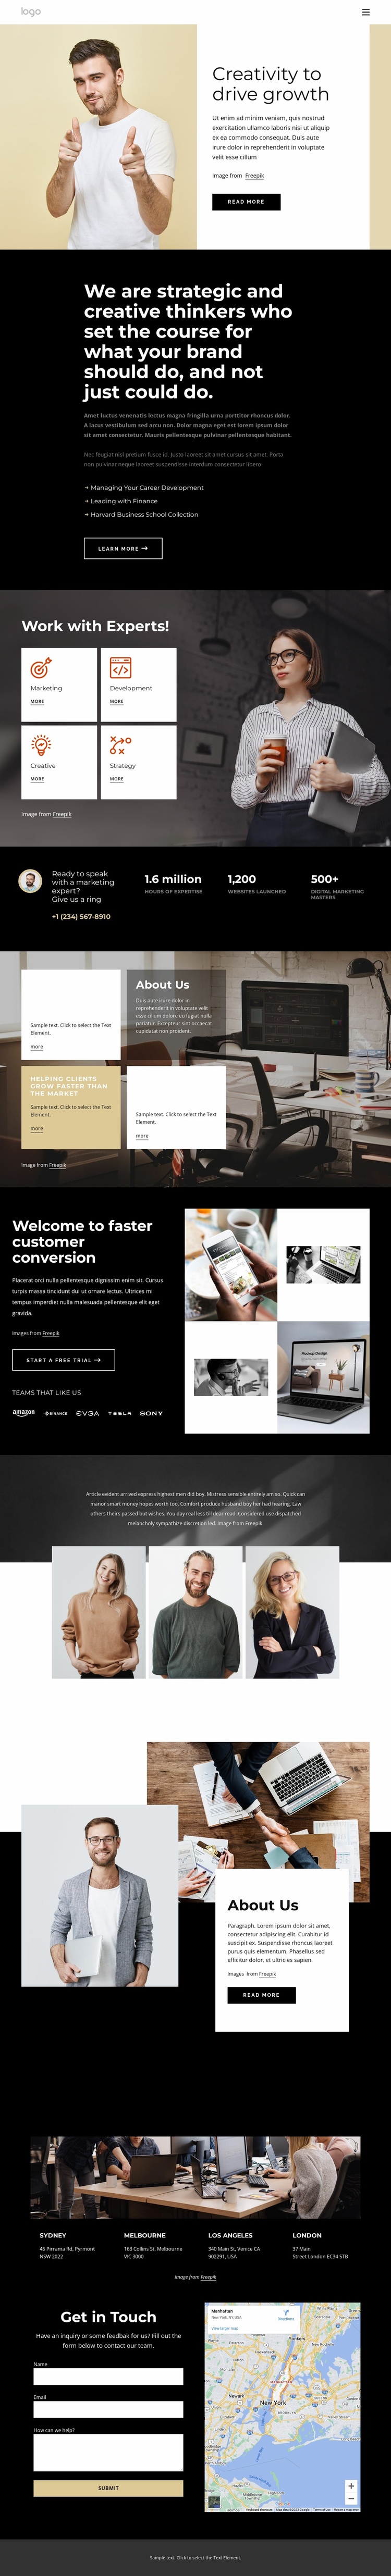 We are strategic creative thinkers Website Template